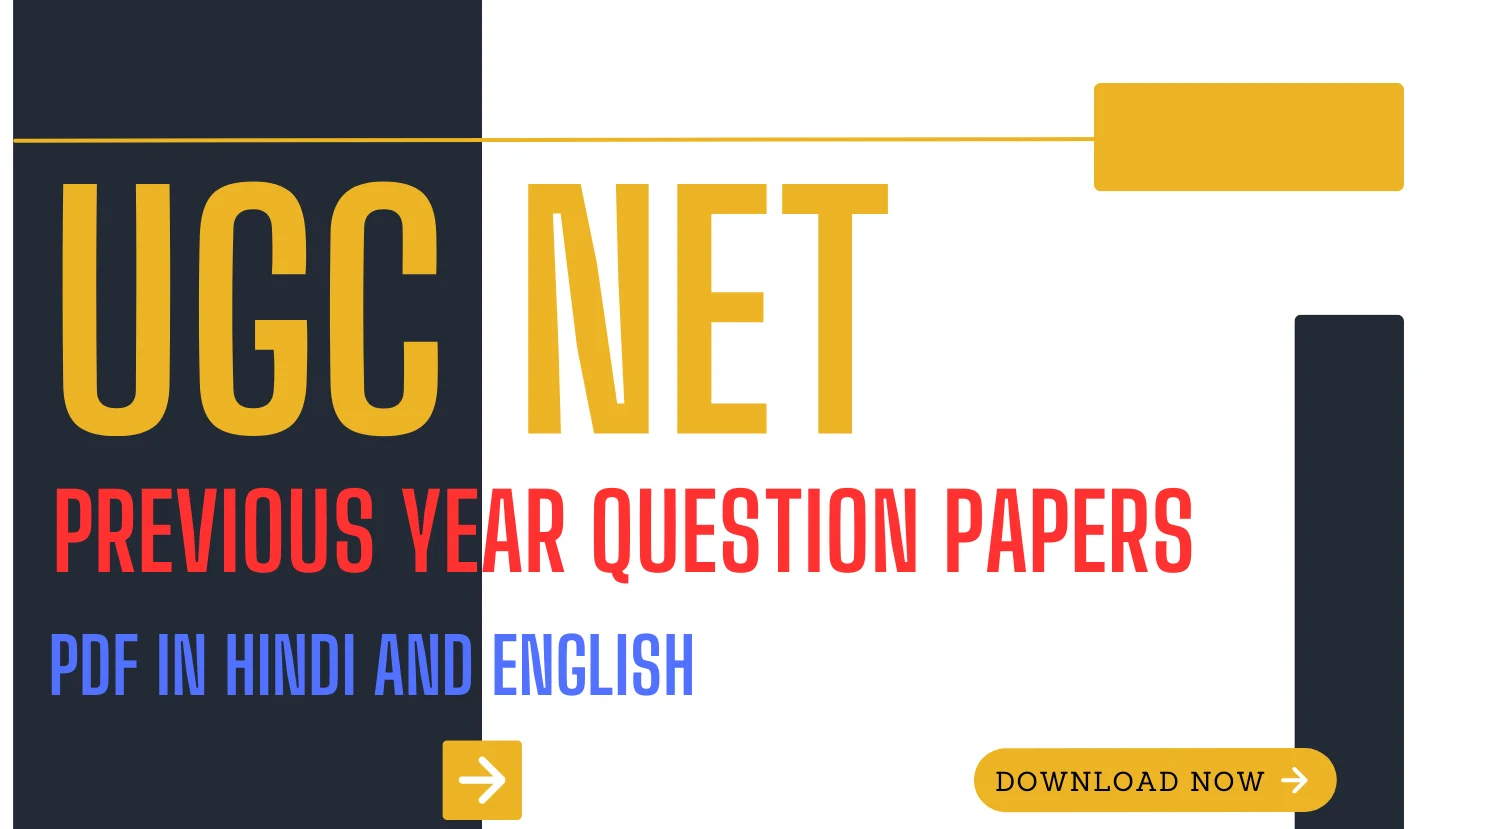 UGC NET Previous Year Question Papers PDF in Hindi and English